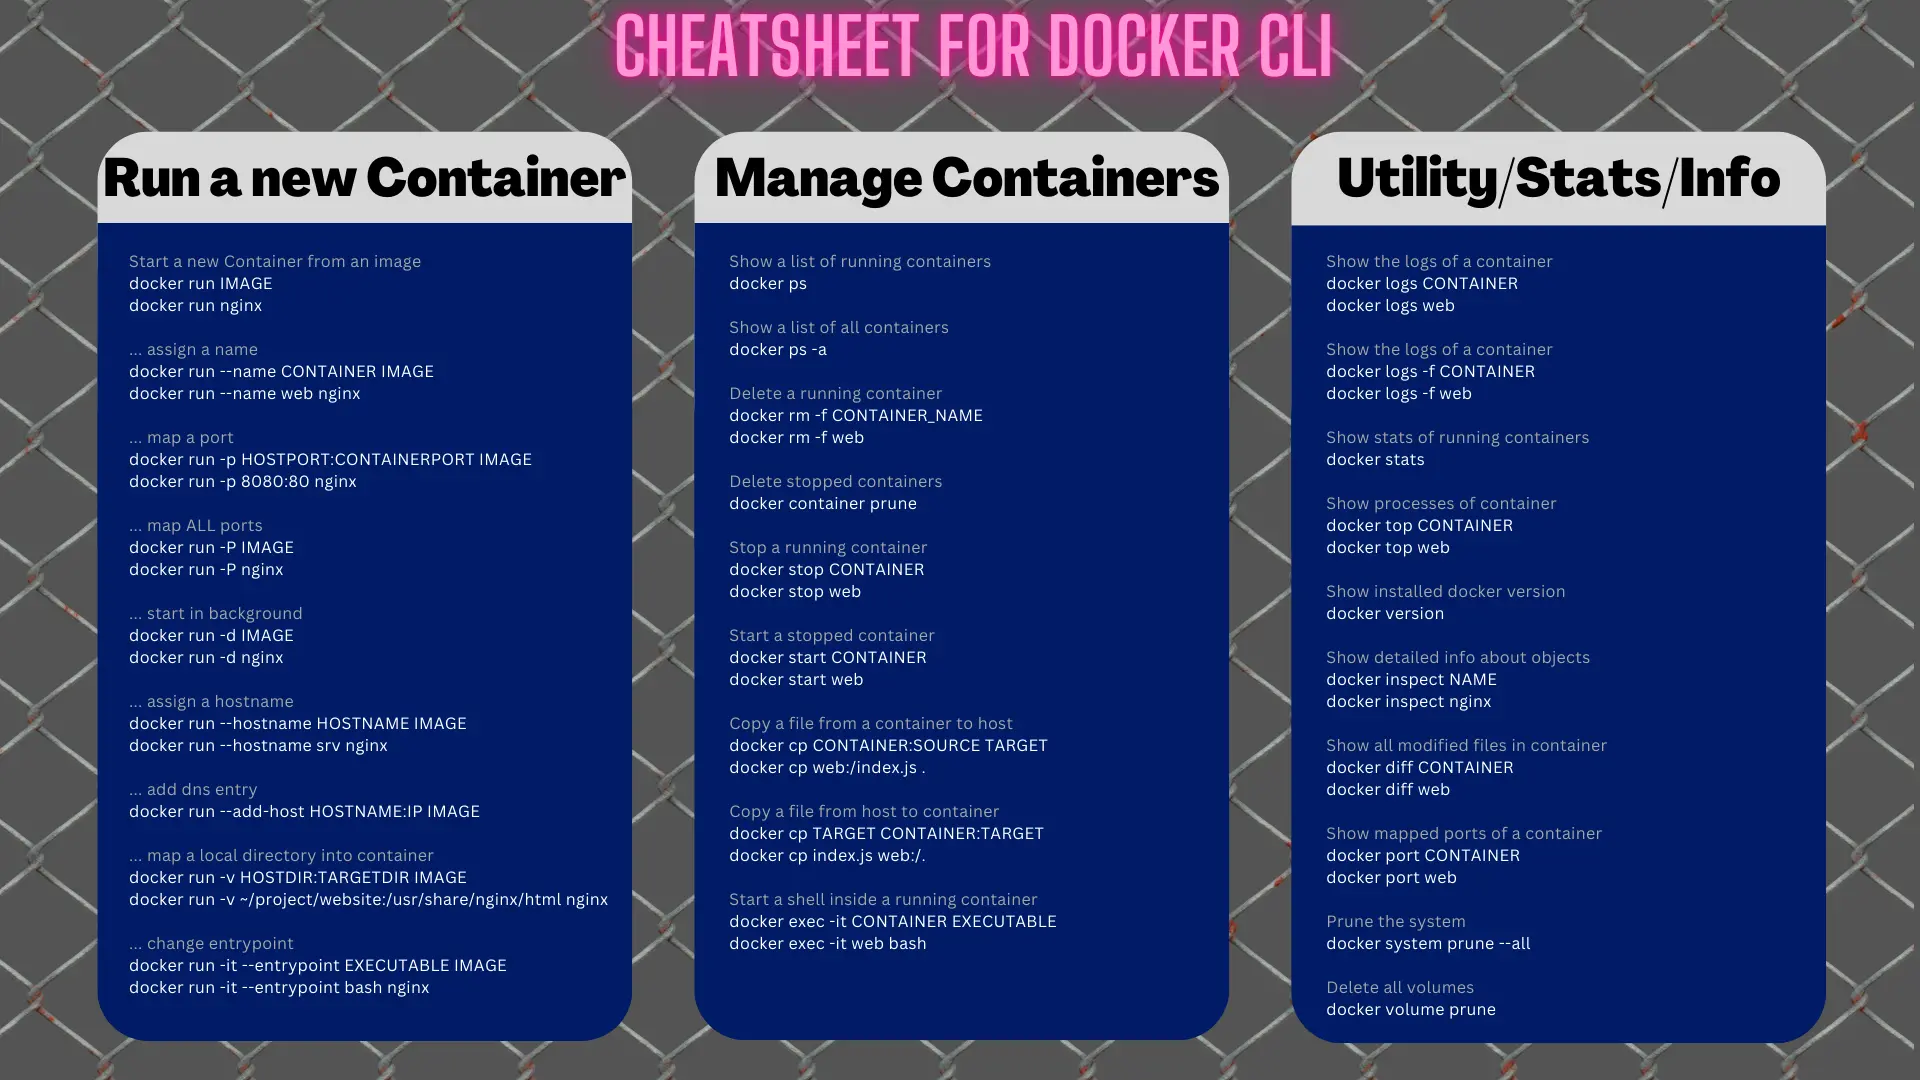 Docker Cheatsheet for Docker CLI with all commands to create/manage container.